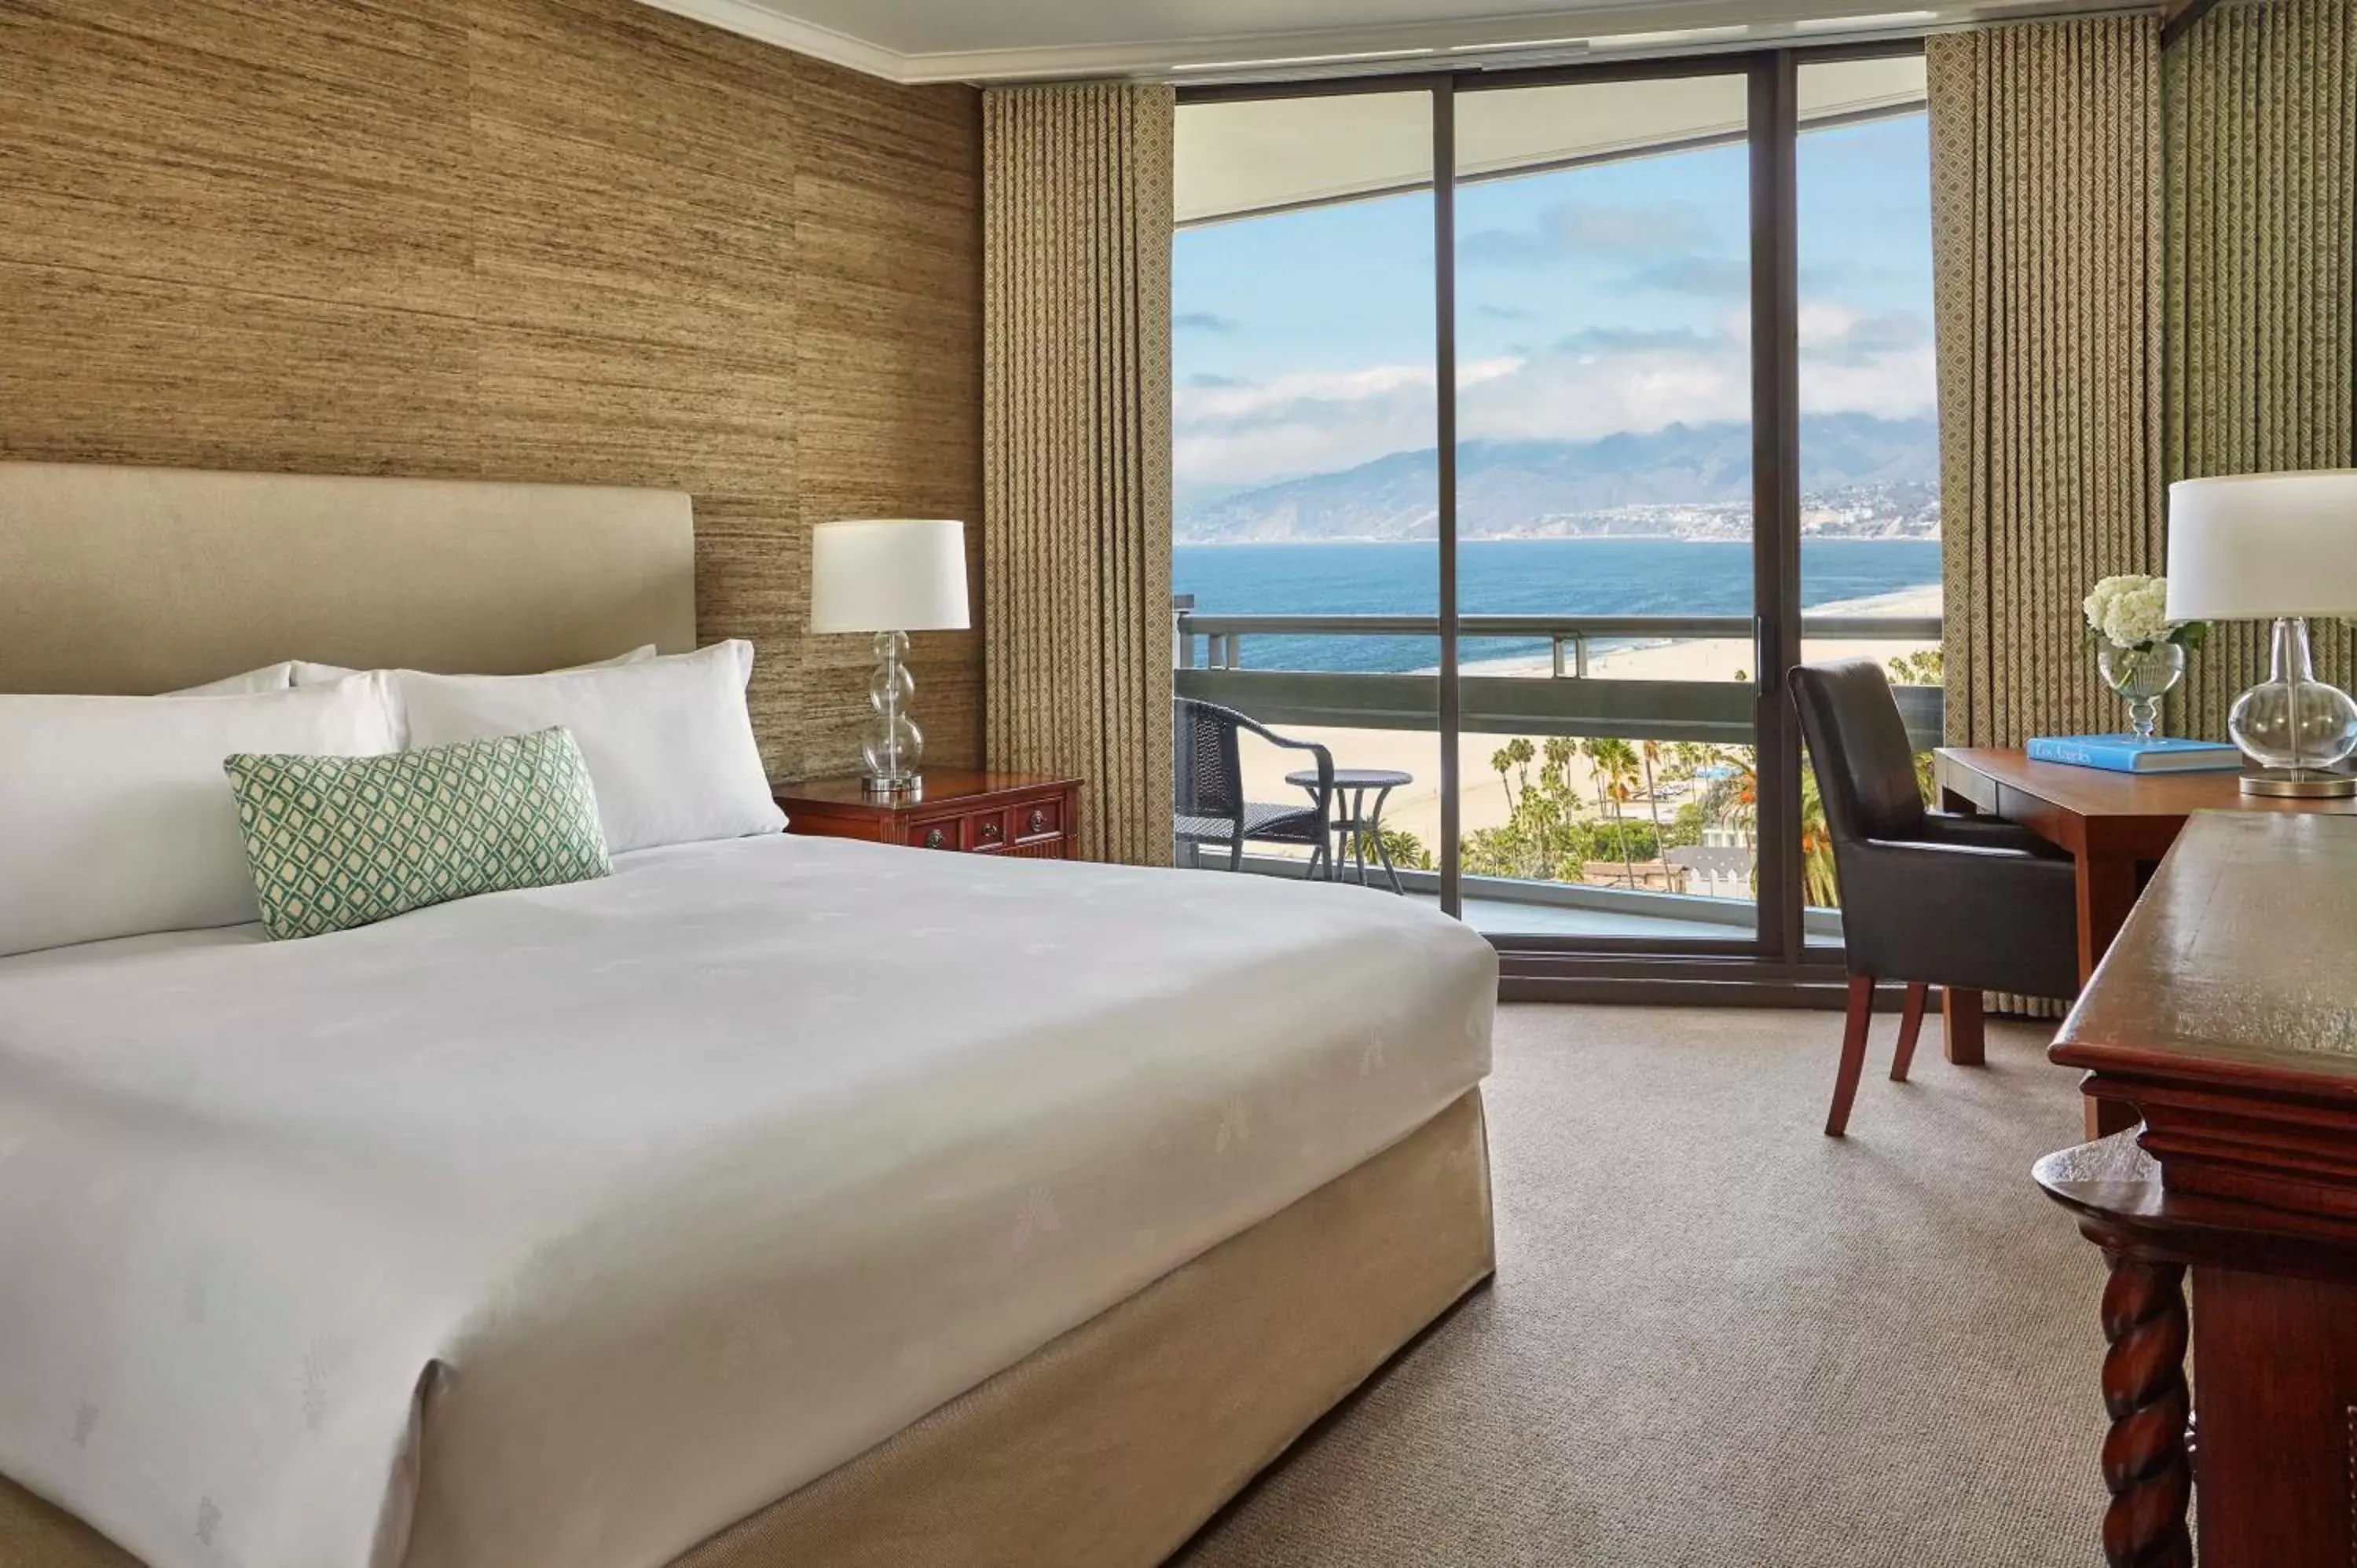 Deluxe King Room with Ocean View in Fairmont Miramar Hotel & Bungalows